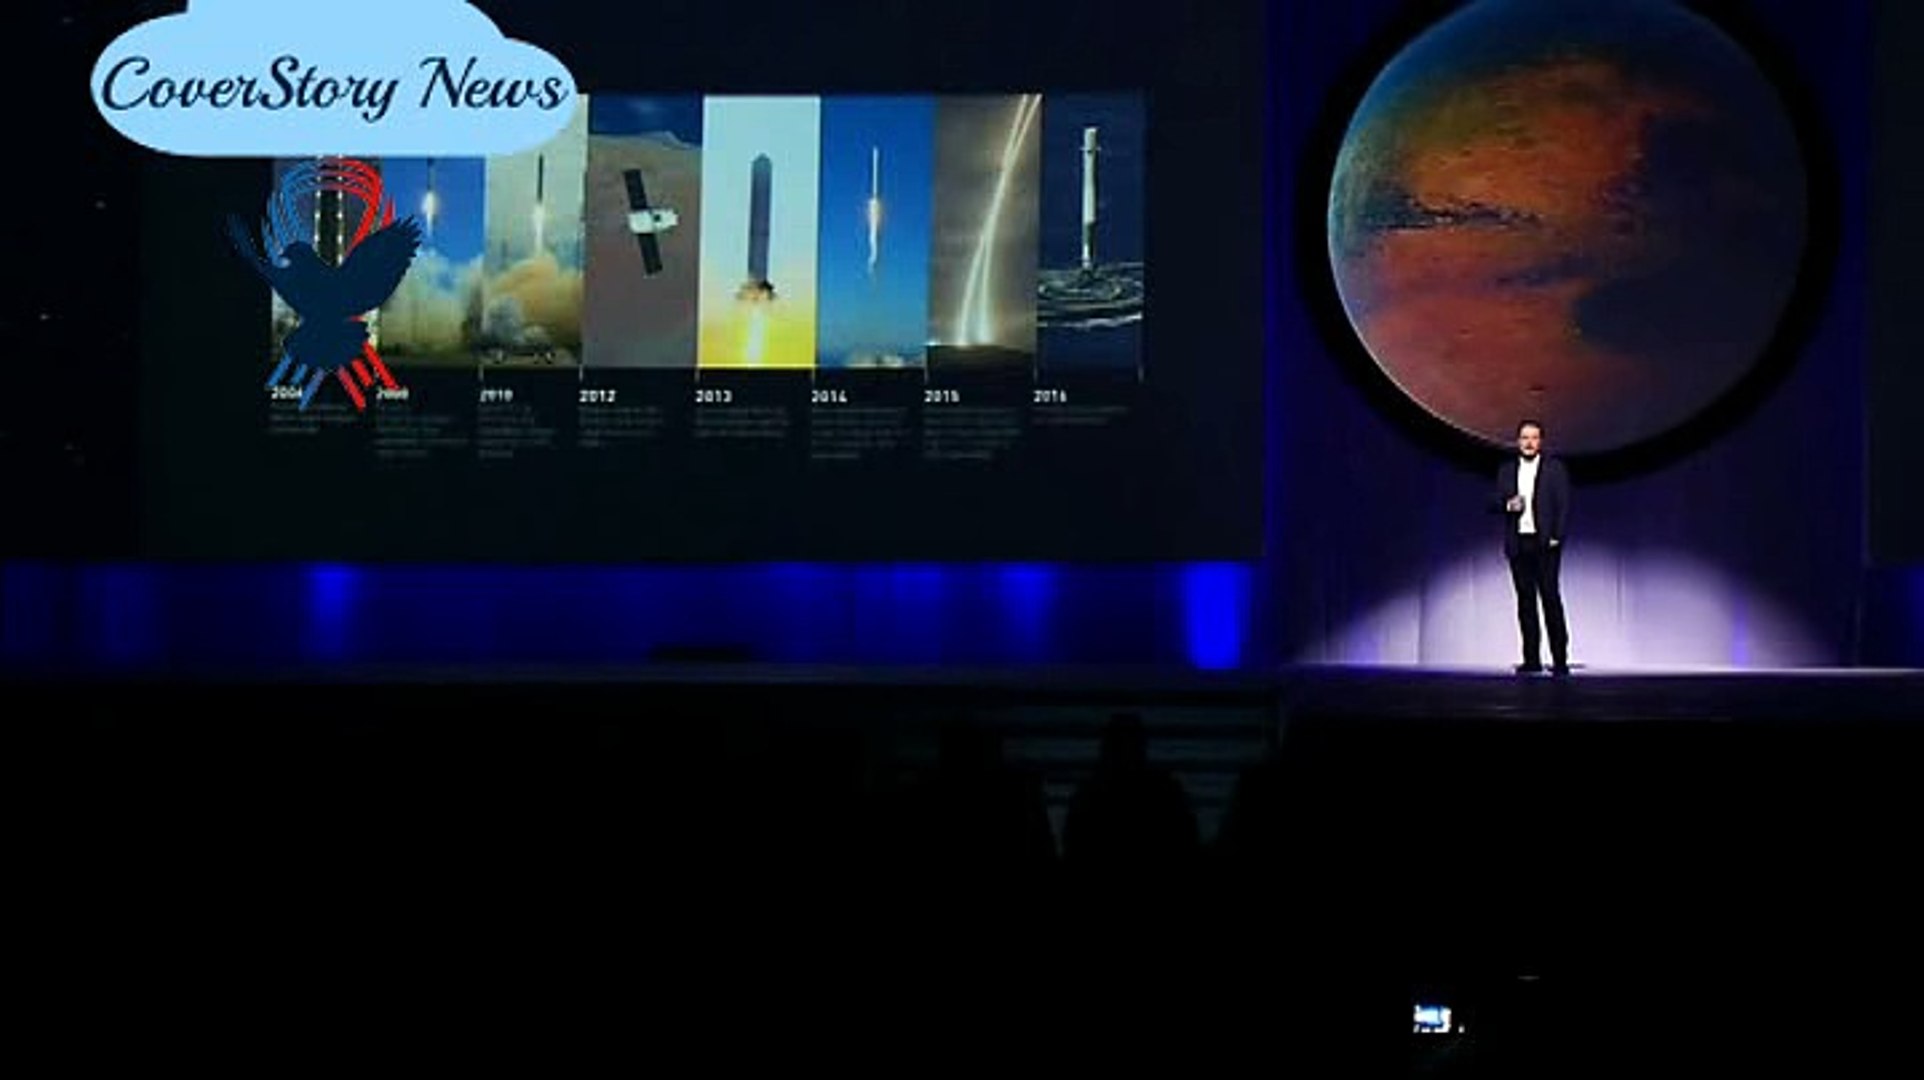 SpaceX plans to colonize Mars with a spacecraft and rocket. The project is expected to take several 